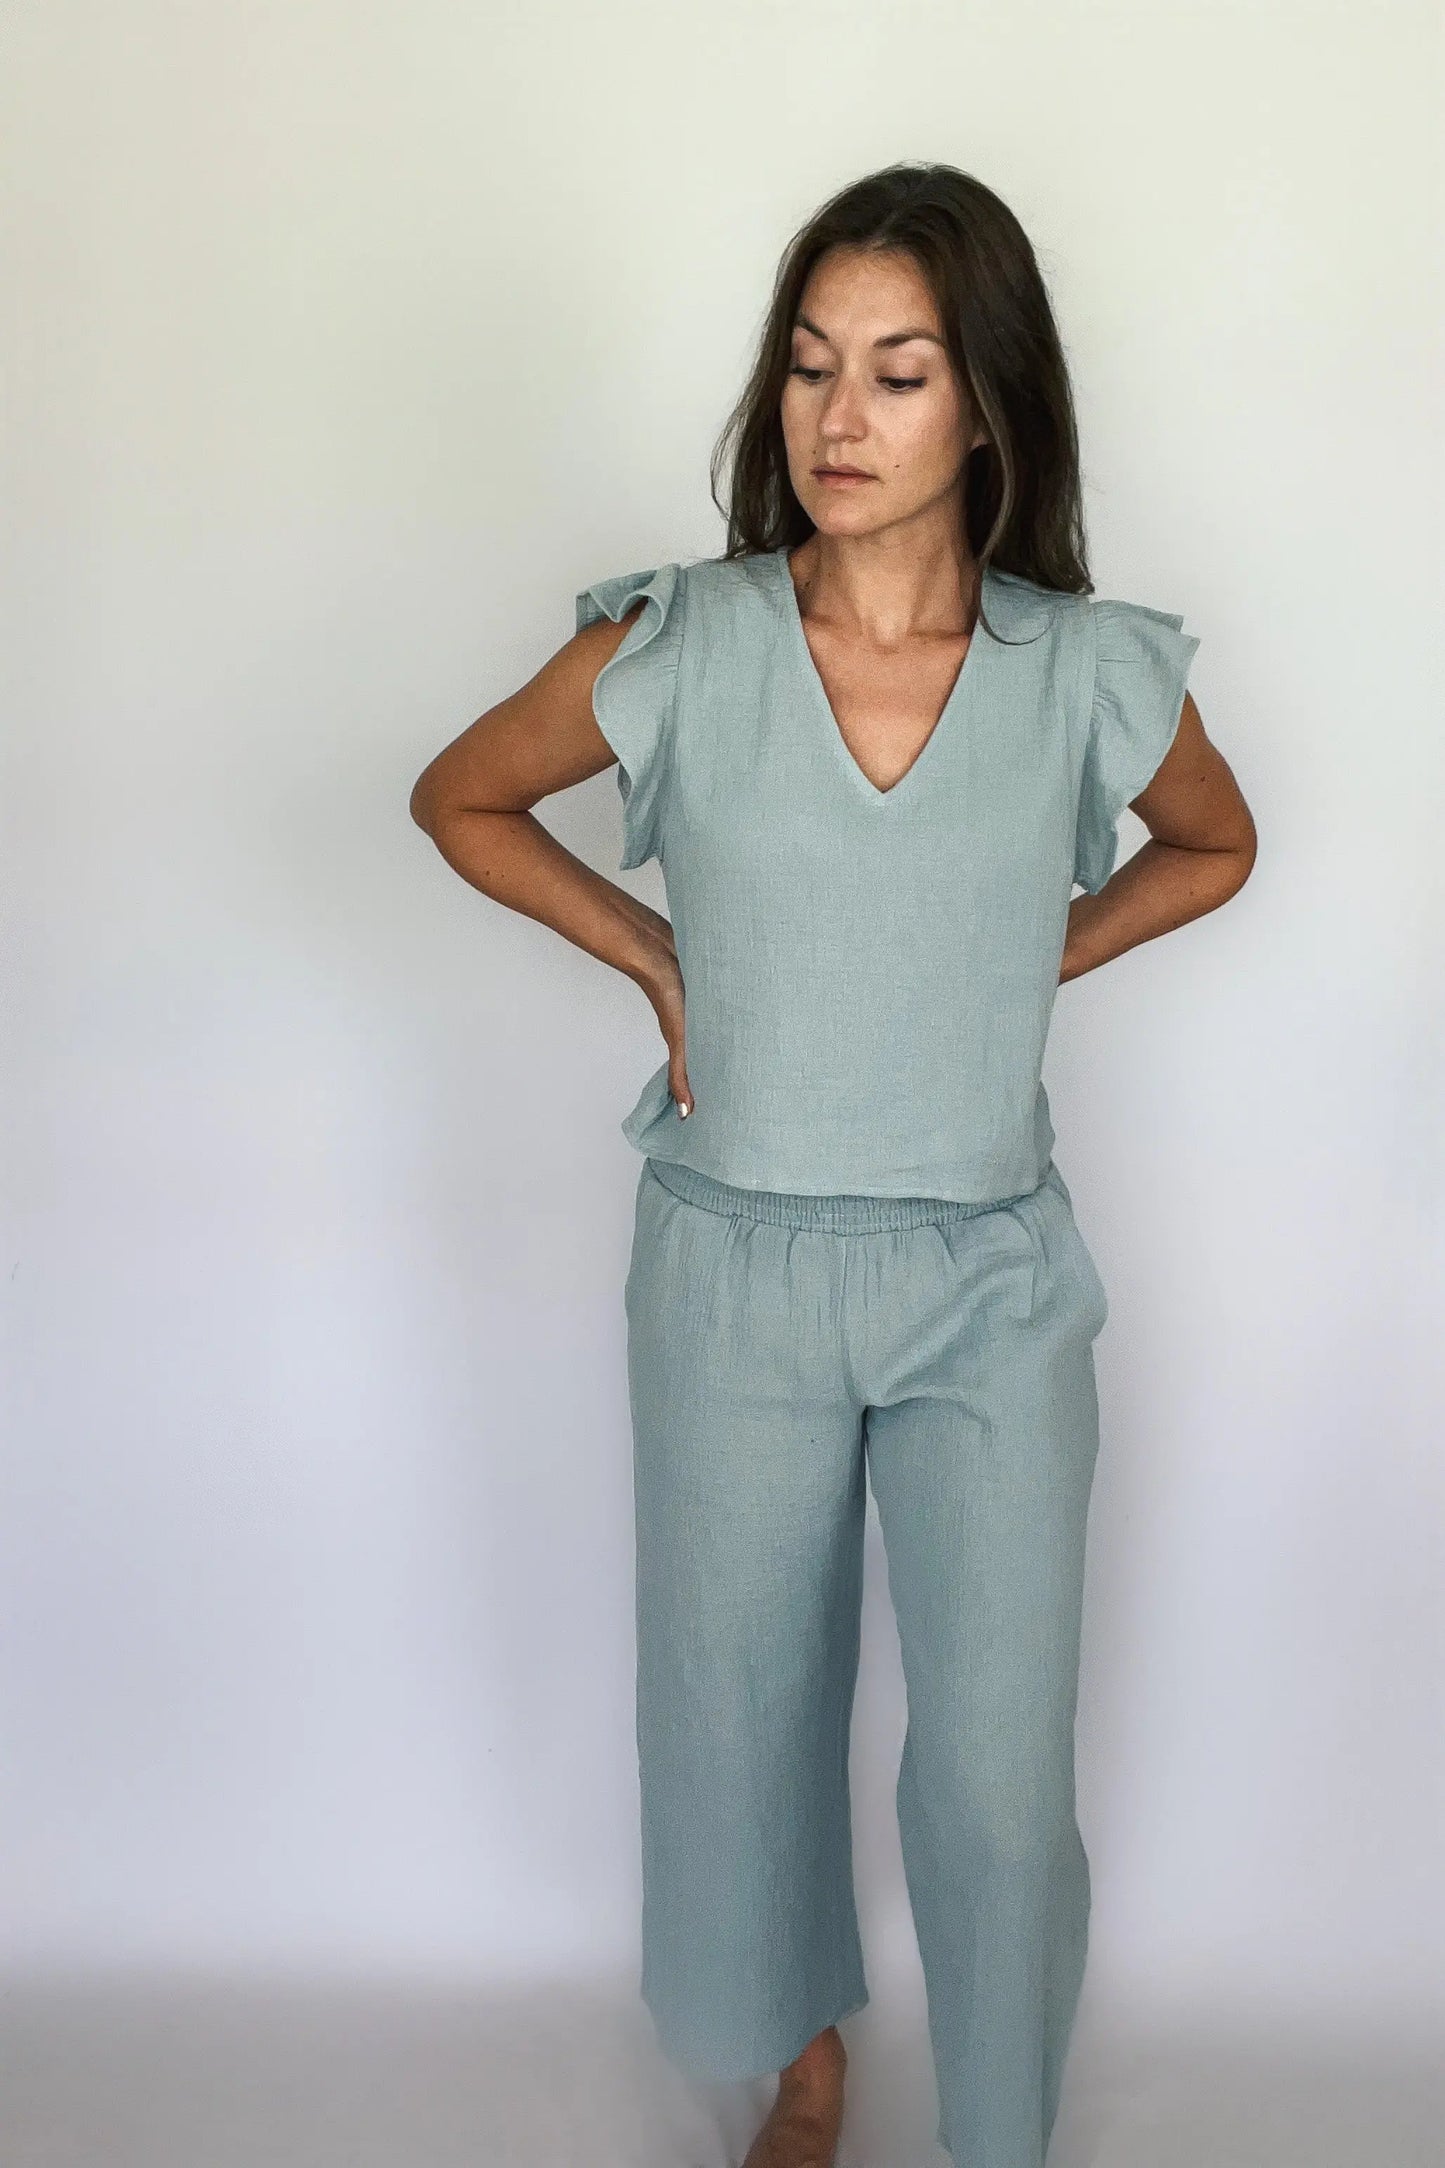 A model showcasing sea blue cotton gauze smocking waist pants paired with matching top